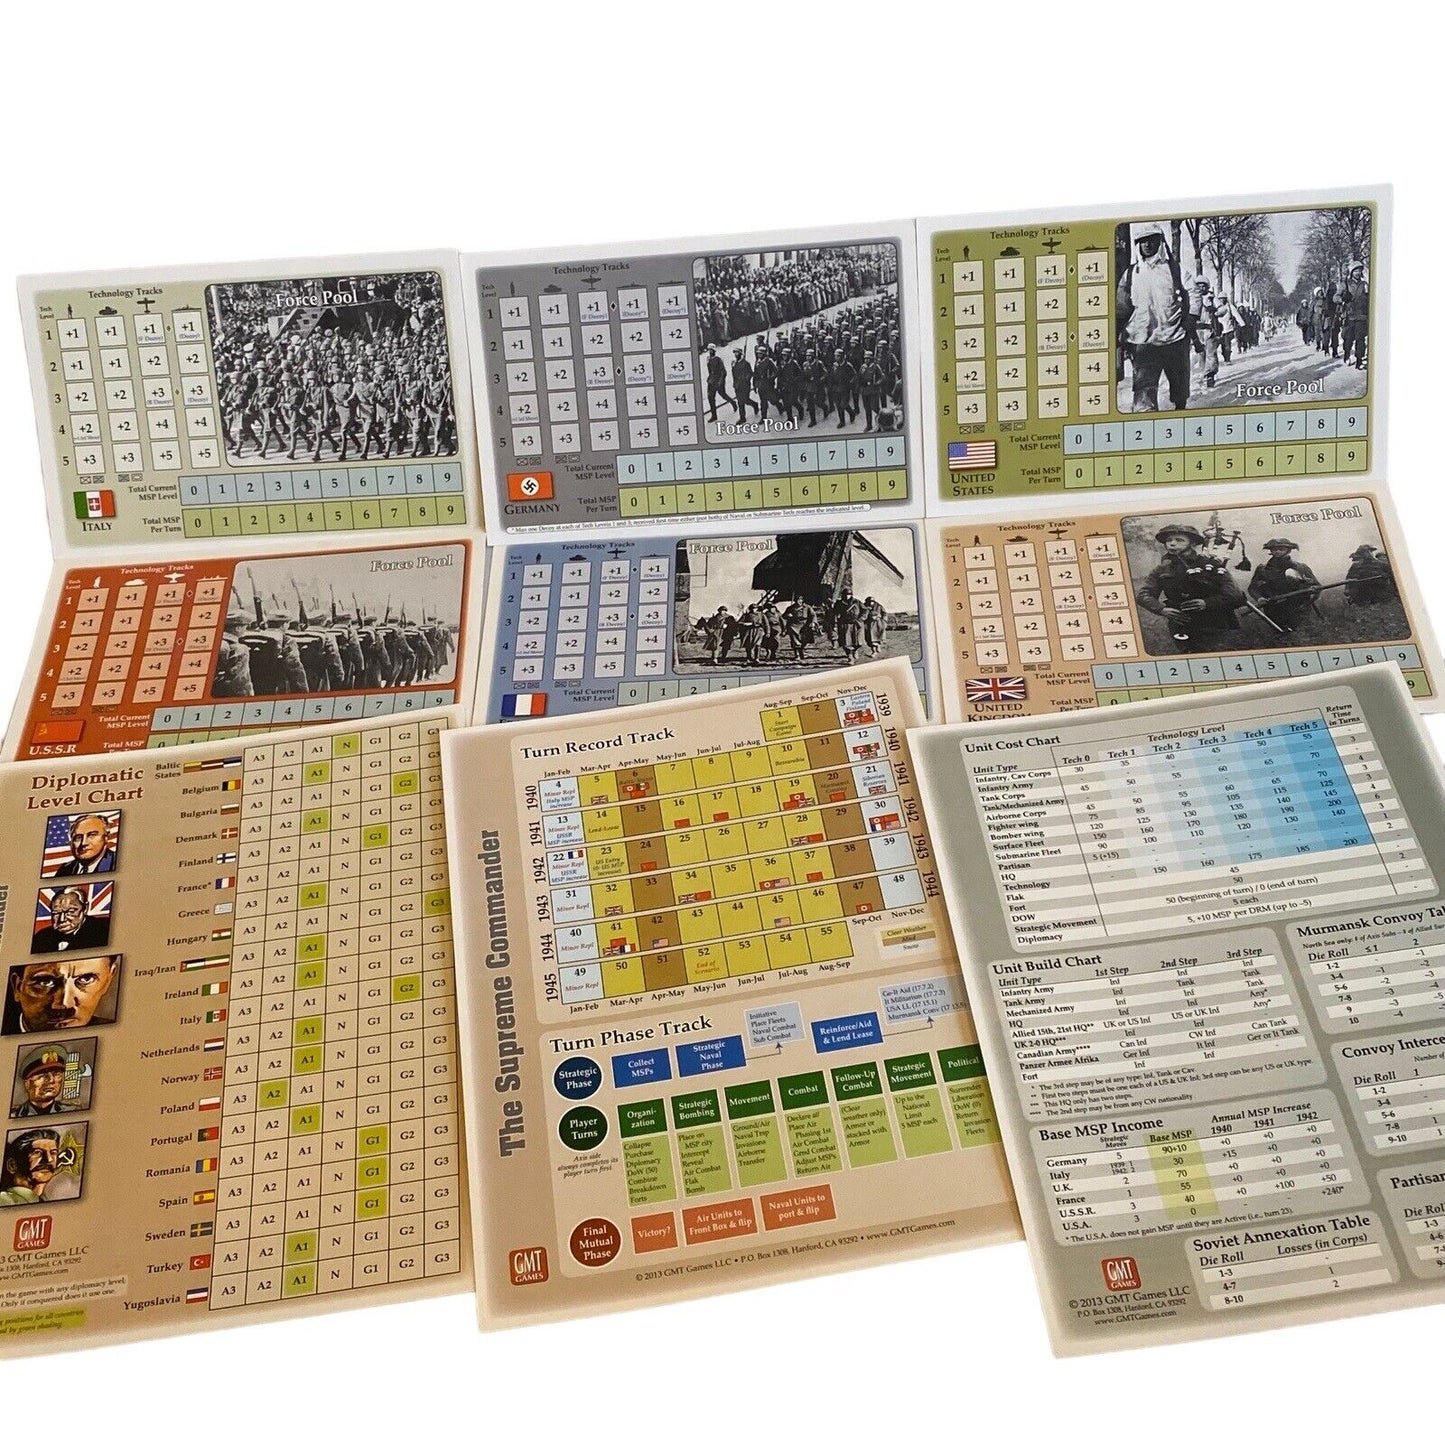 The Supreme Commander WWII in Europe 1939-19-45 GMT Complete, Partially Punched